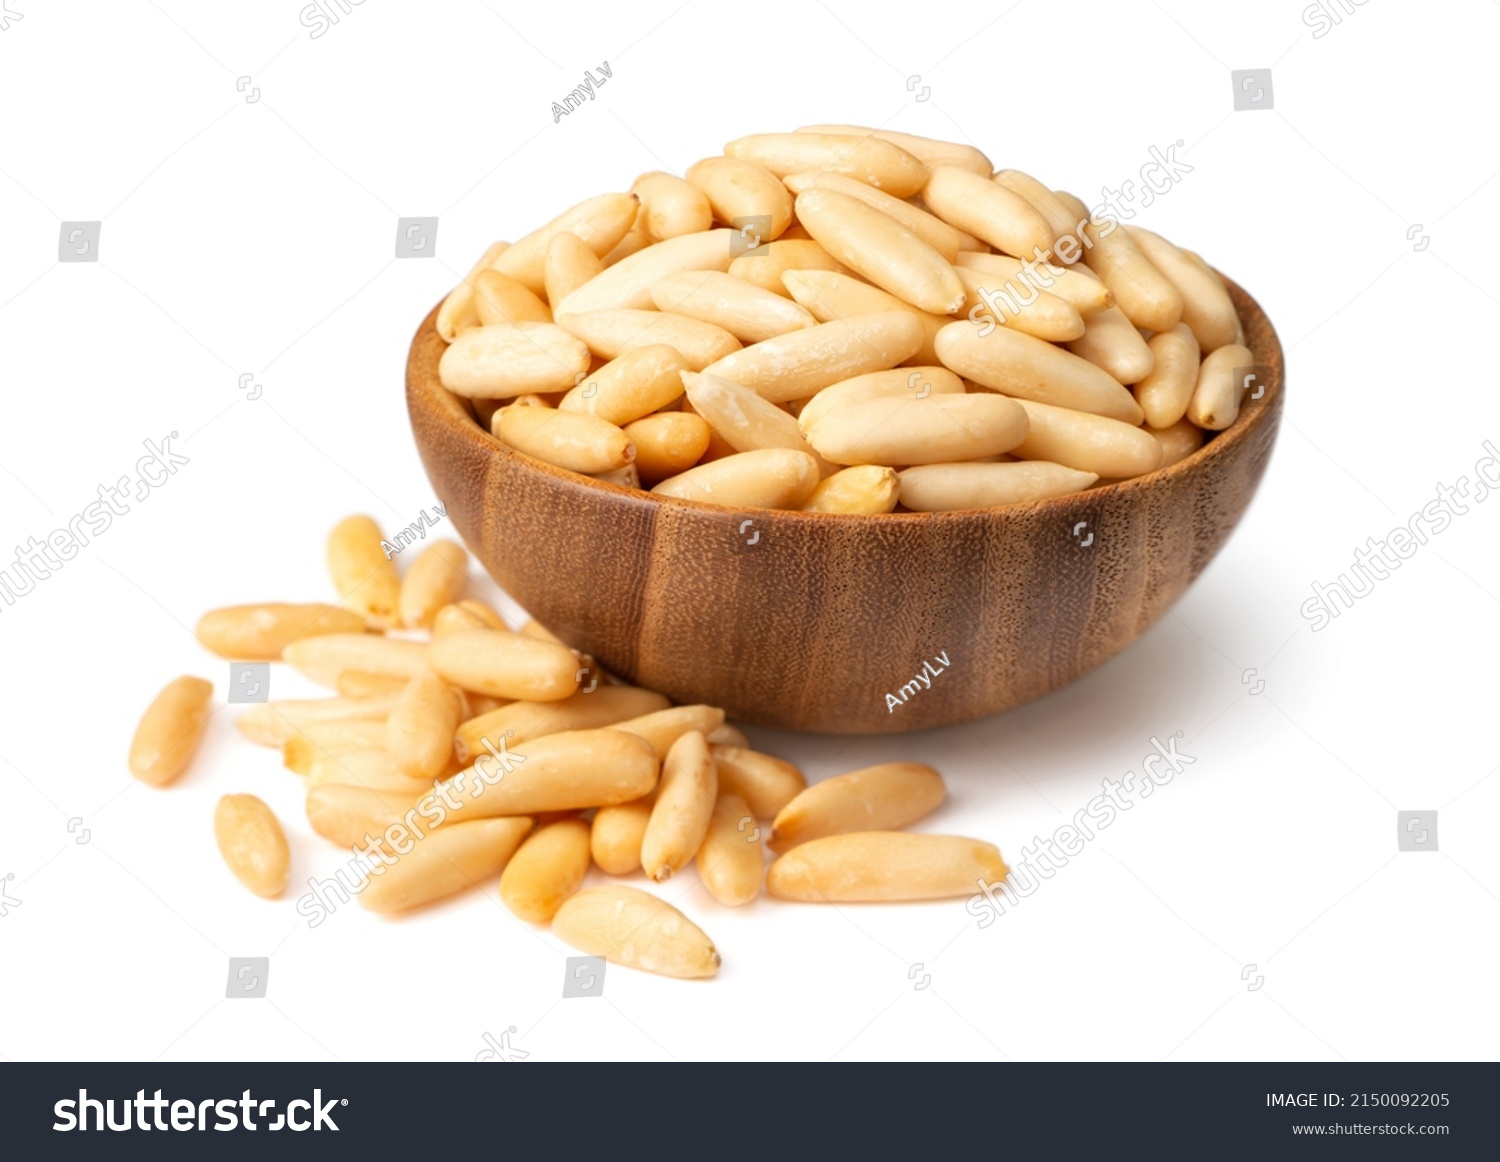 Roasted pine nuts in the wooden bowl. isolated on white background. #2150092205